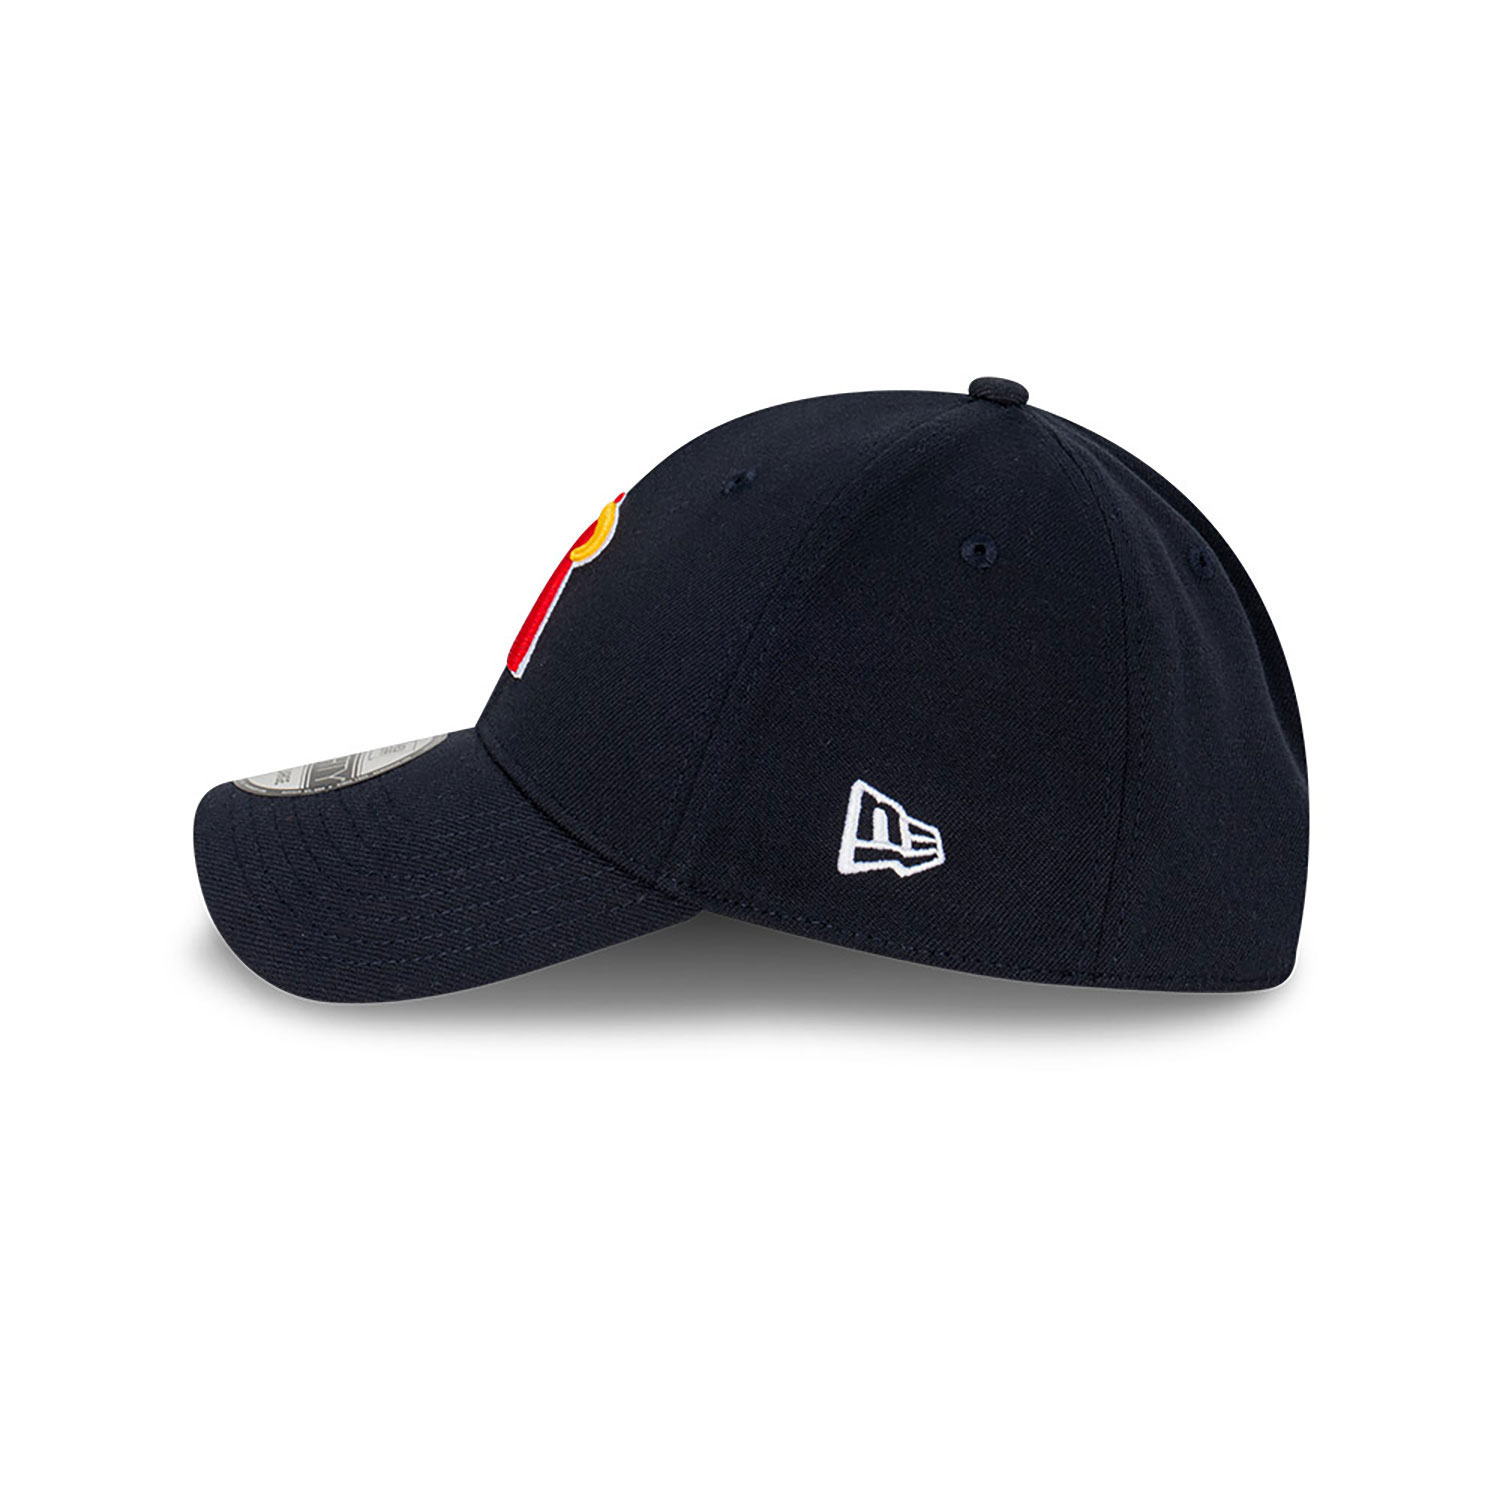 LA Angels Cooperstown Navy 39THIRTY Stretch Fit Cap